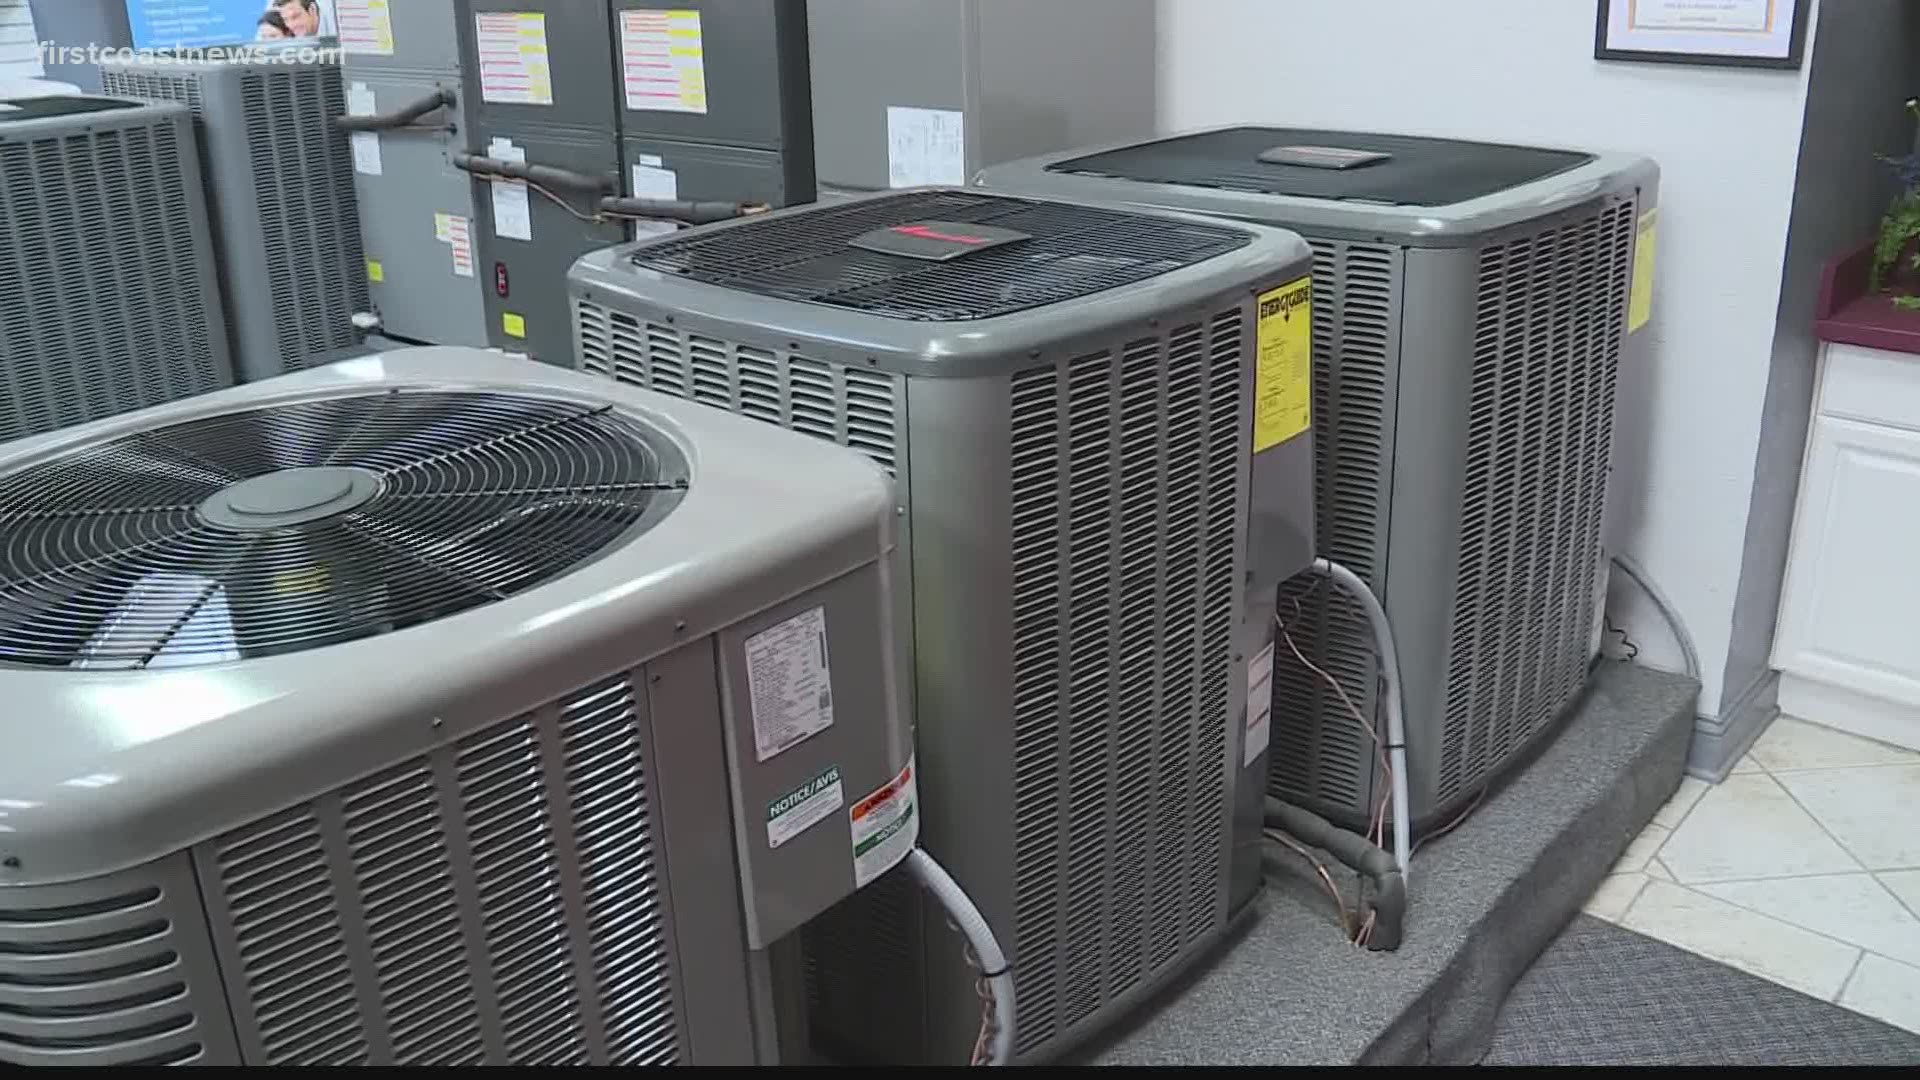 The air conditioning industry was one of many affected with equipment supply issues due to the COVID-19 pandemic. Now, prices are going higher for new units.